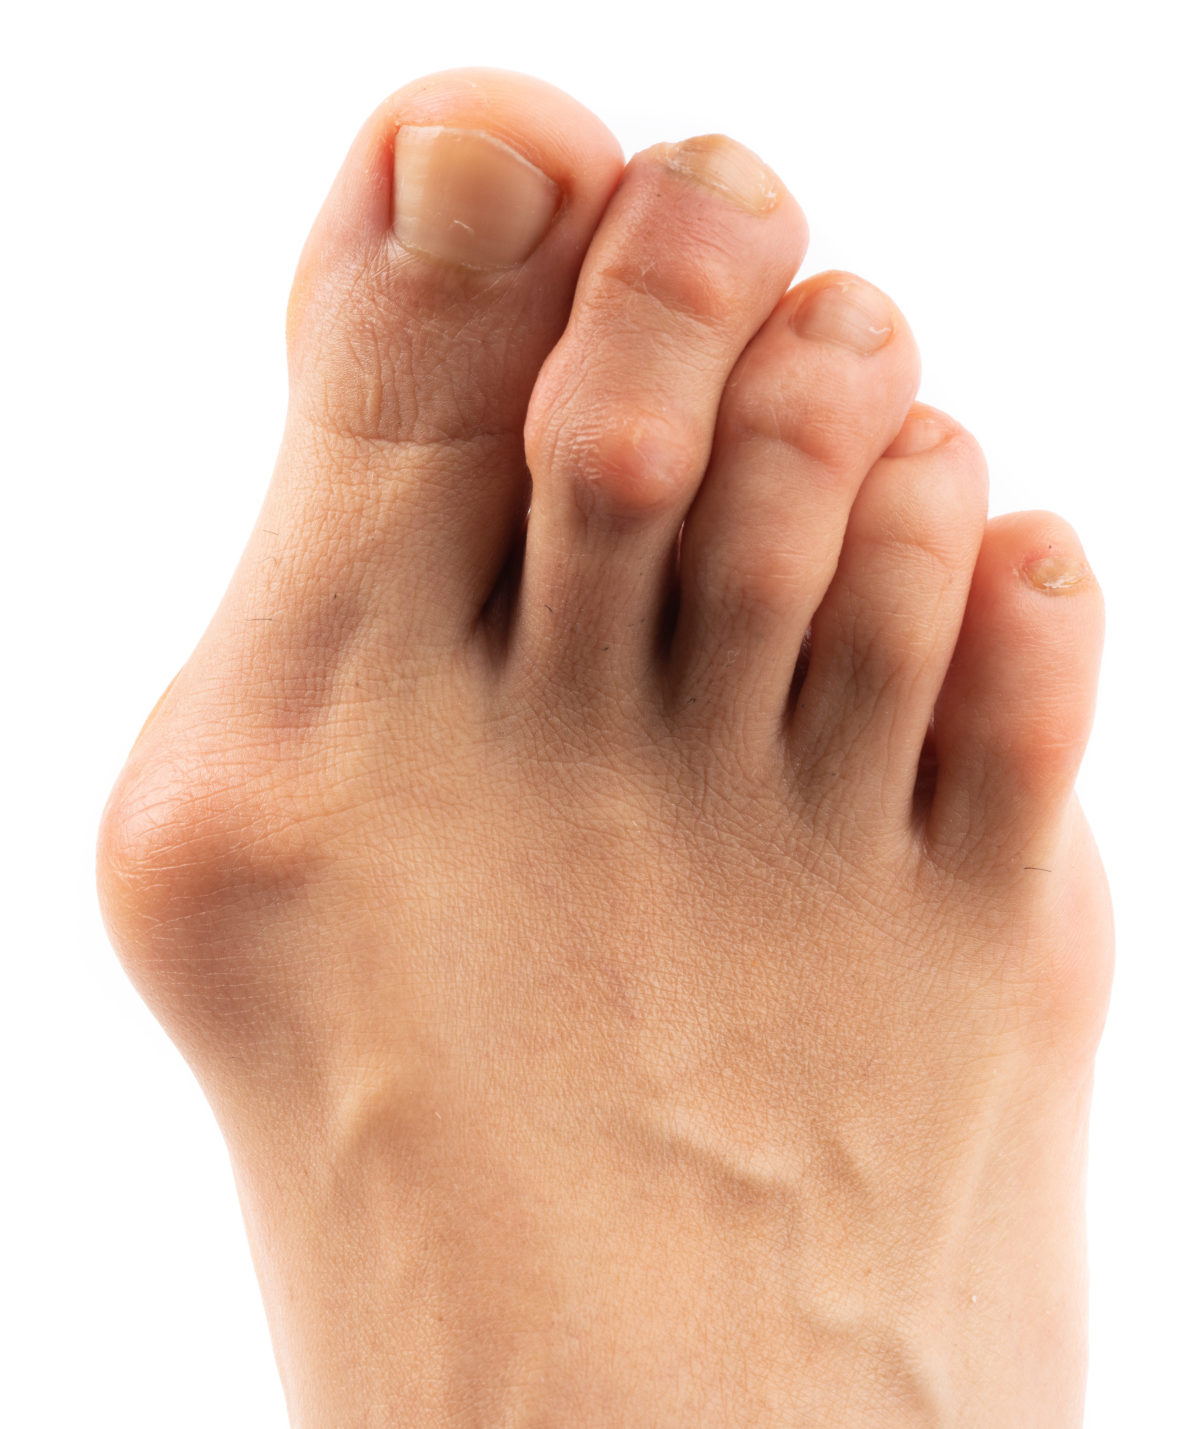 Bunions Causes, Types, and Treatments Canyon Oaks Foot & Ankle